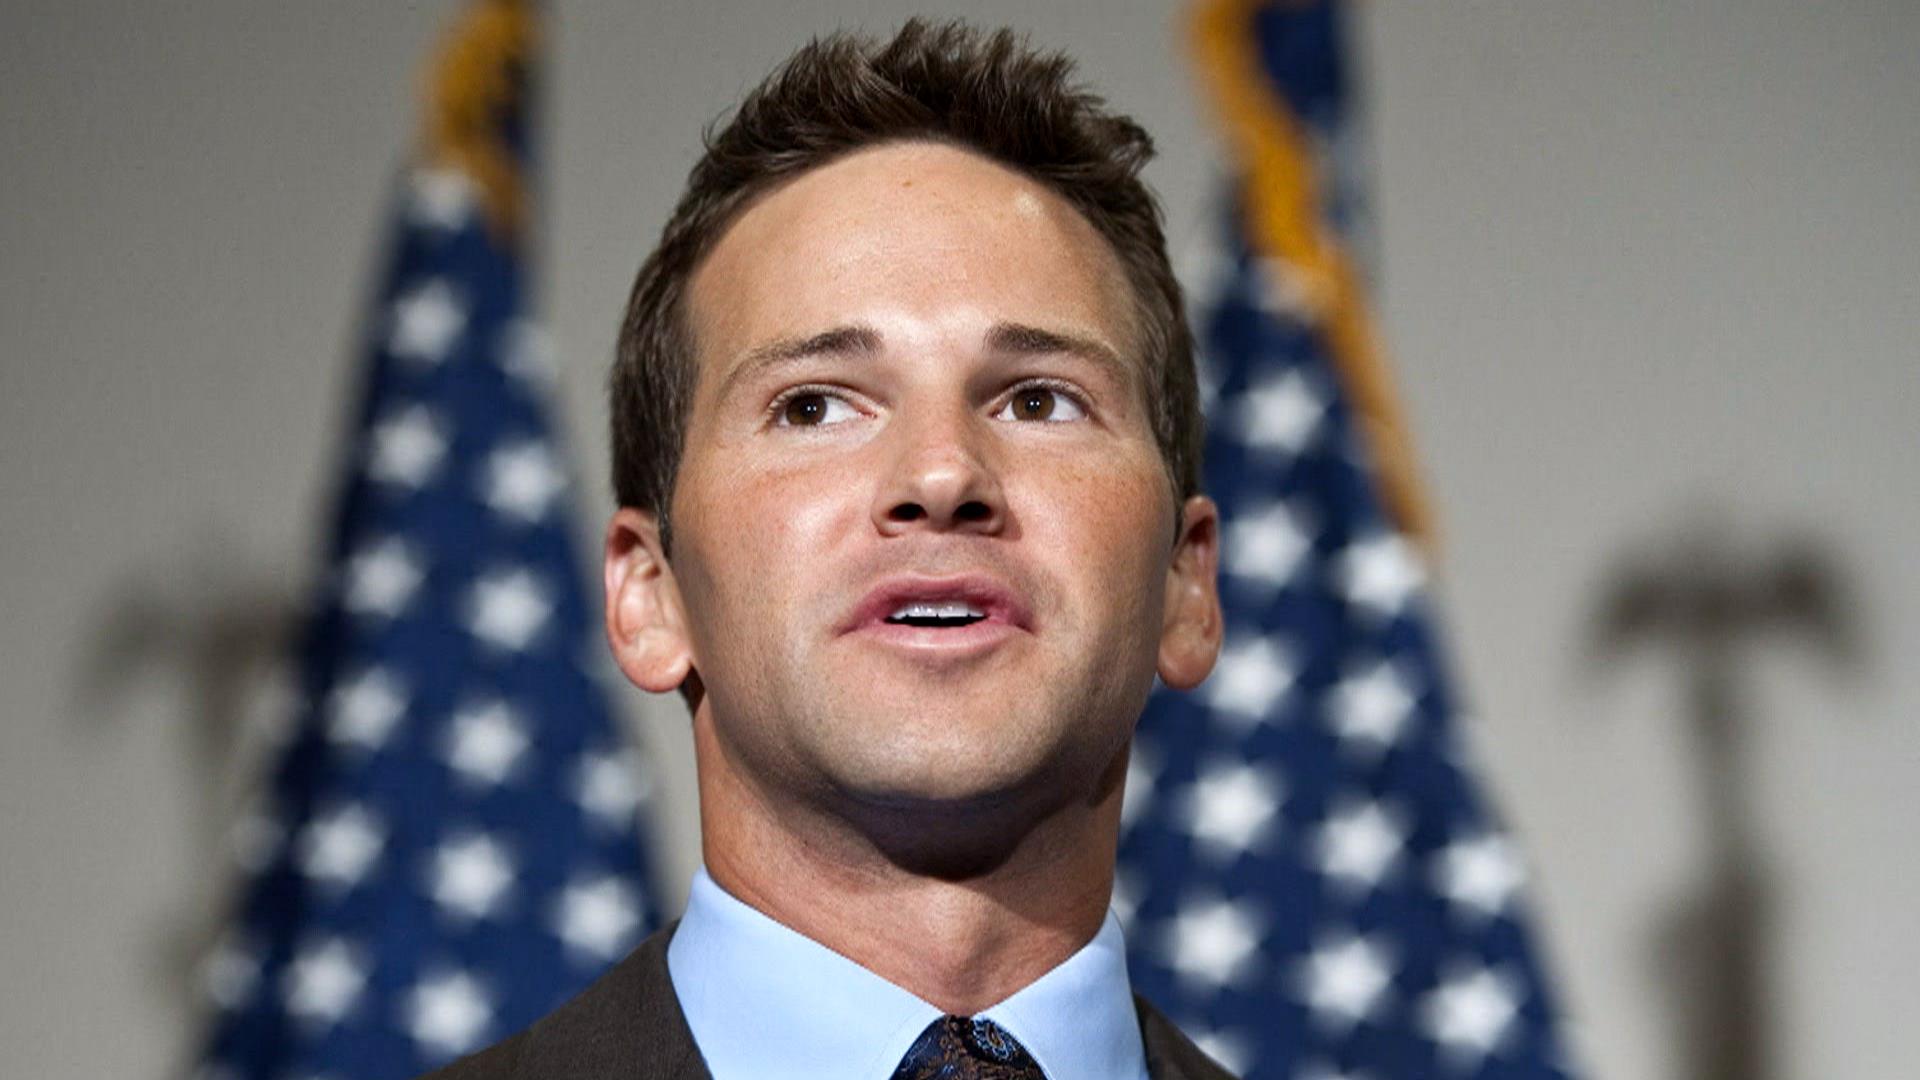 Aaron Schock indicted on counts of wire fraud, theft of government funds